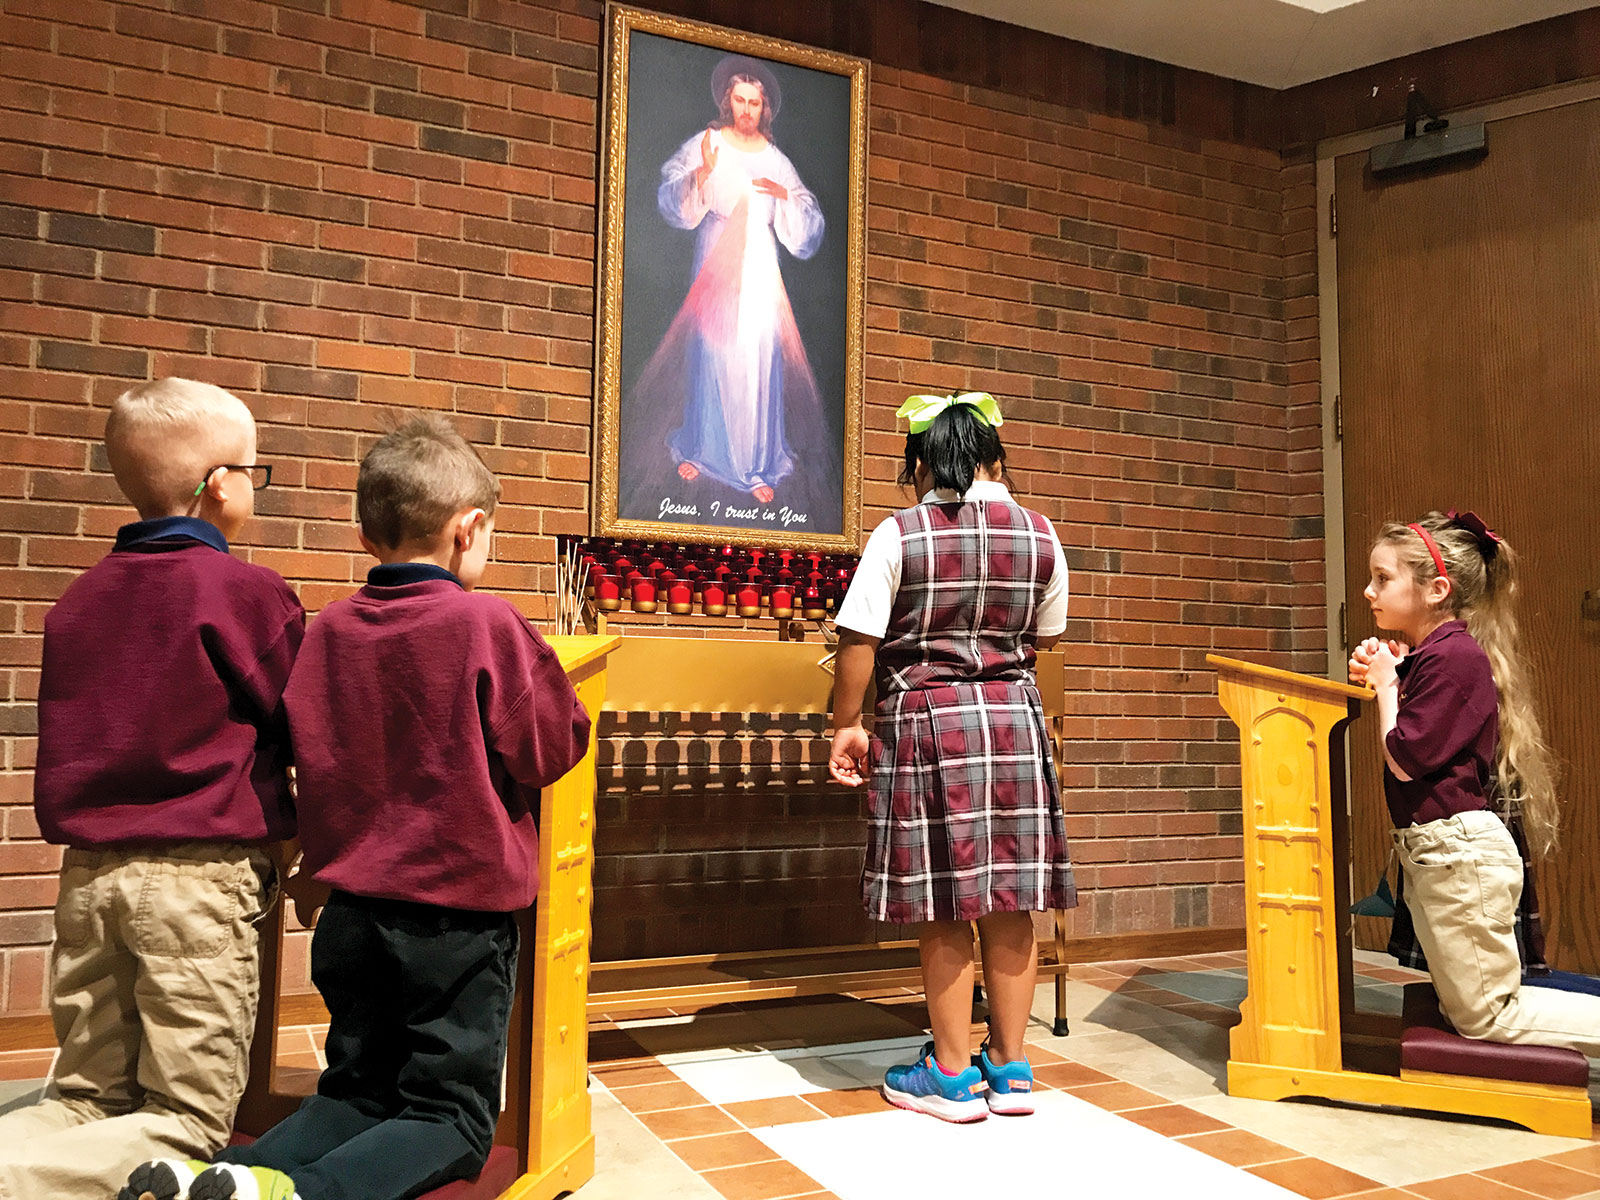 Rebecca Tling, center, lights a candle in the Divine Mercy shrine in St. Barnabas Church in Indianapolis. Praying in the shrine are Harrison Fey, left, Anthony Lewis, Addie Sheehan and Nora Taylor (obscured). The children are first-grade students at St. Barnabas School. (Submitted photo by Joe Sheehan)